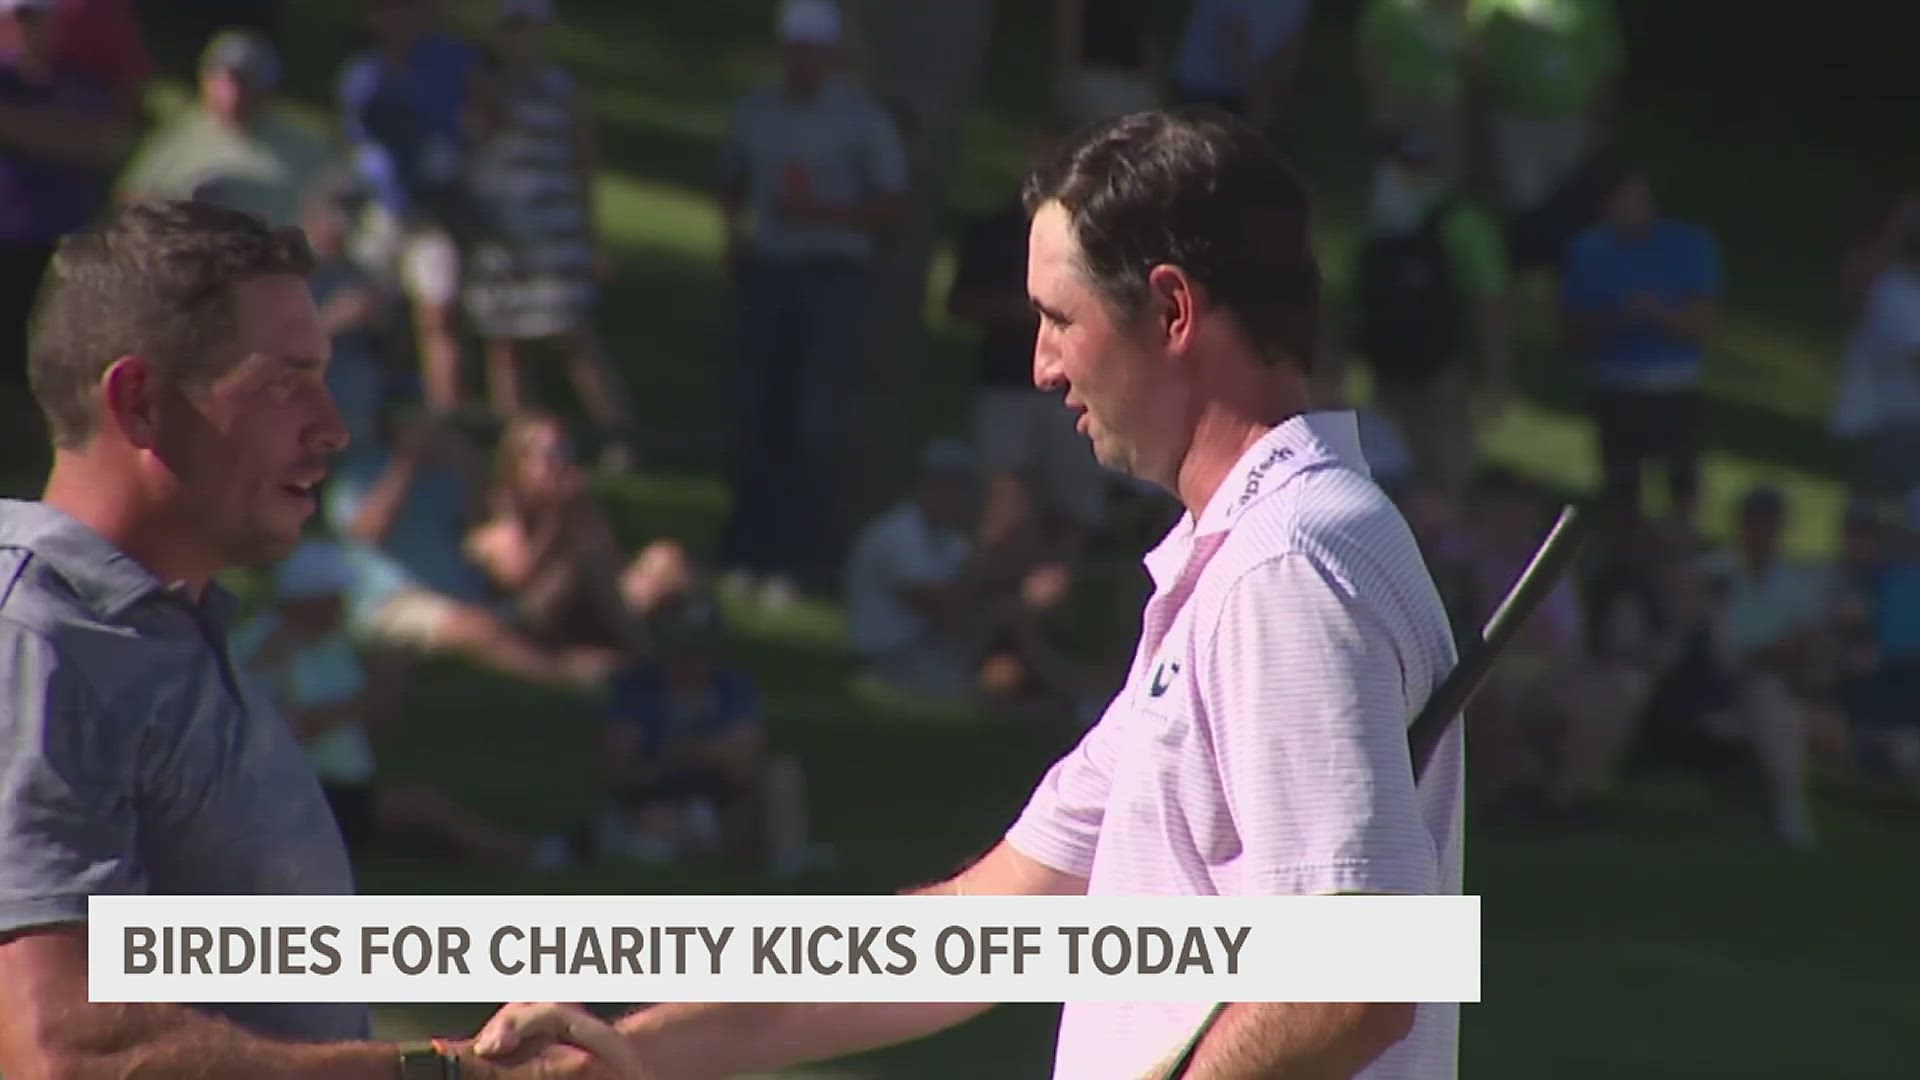 In 2022, Birdies for Charity raised a record $13.9 million for 481 charities in the Quad Cities region.